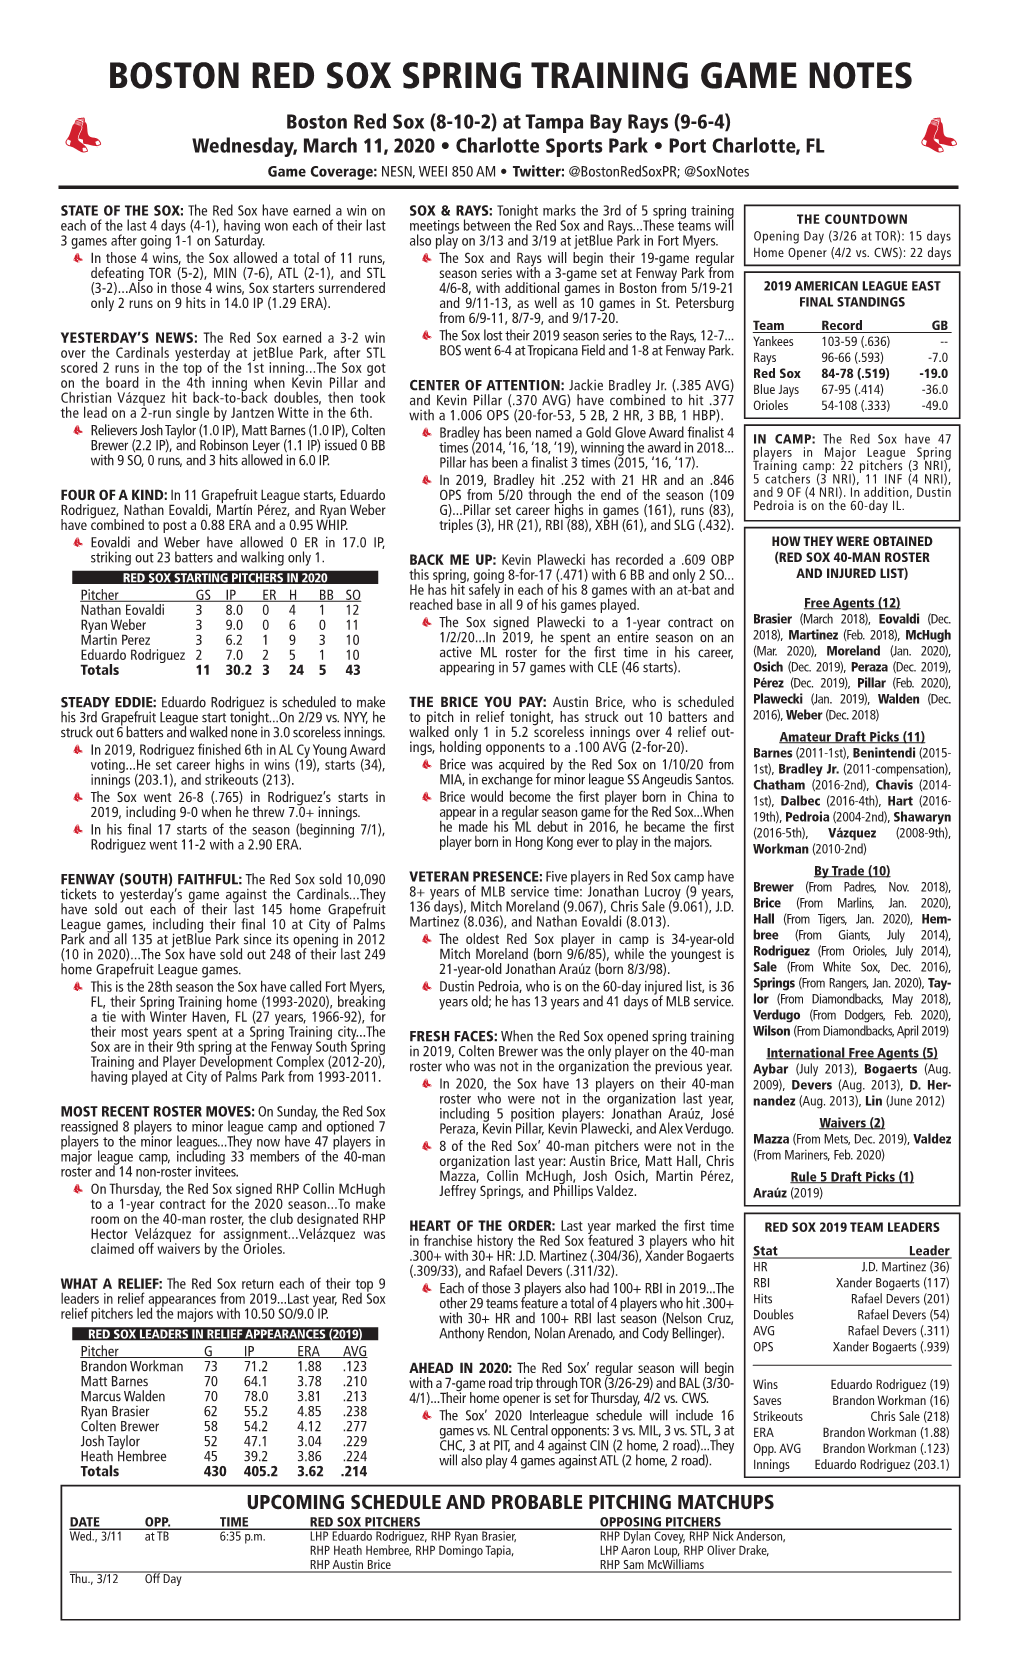 Boston Red Sox Spring Training Game Notes